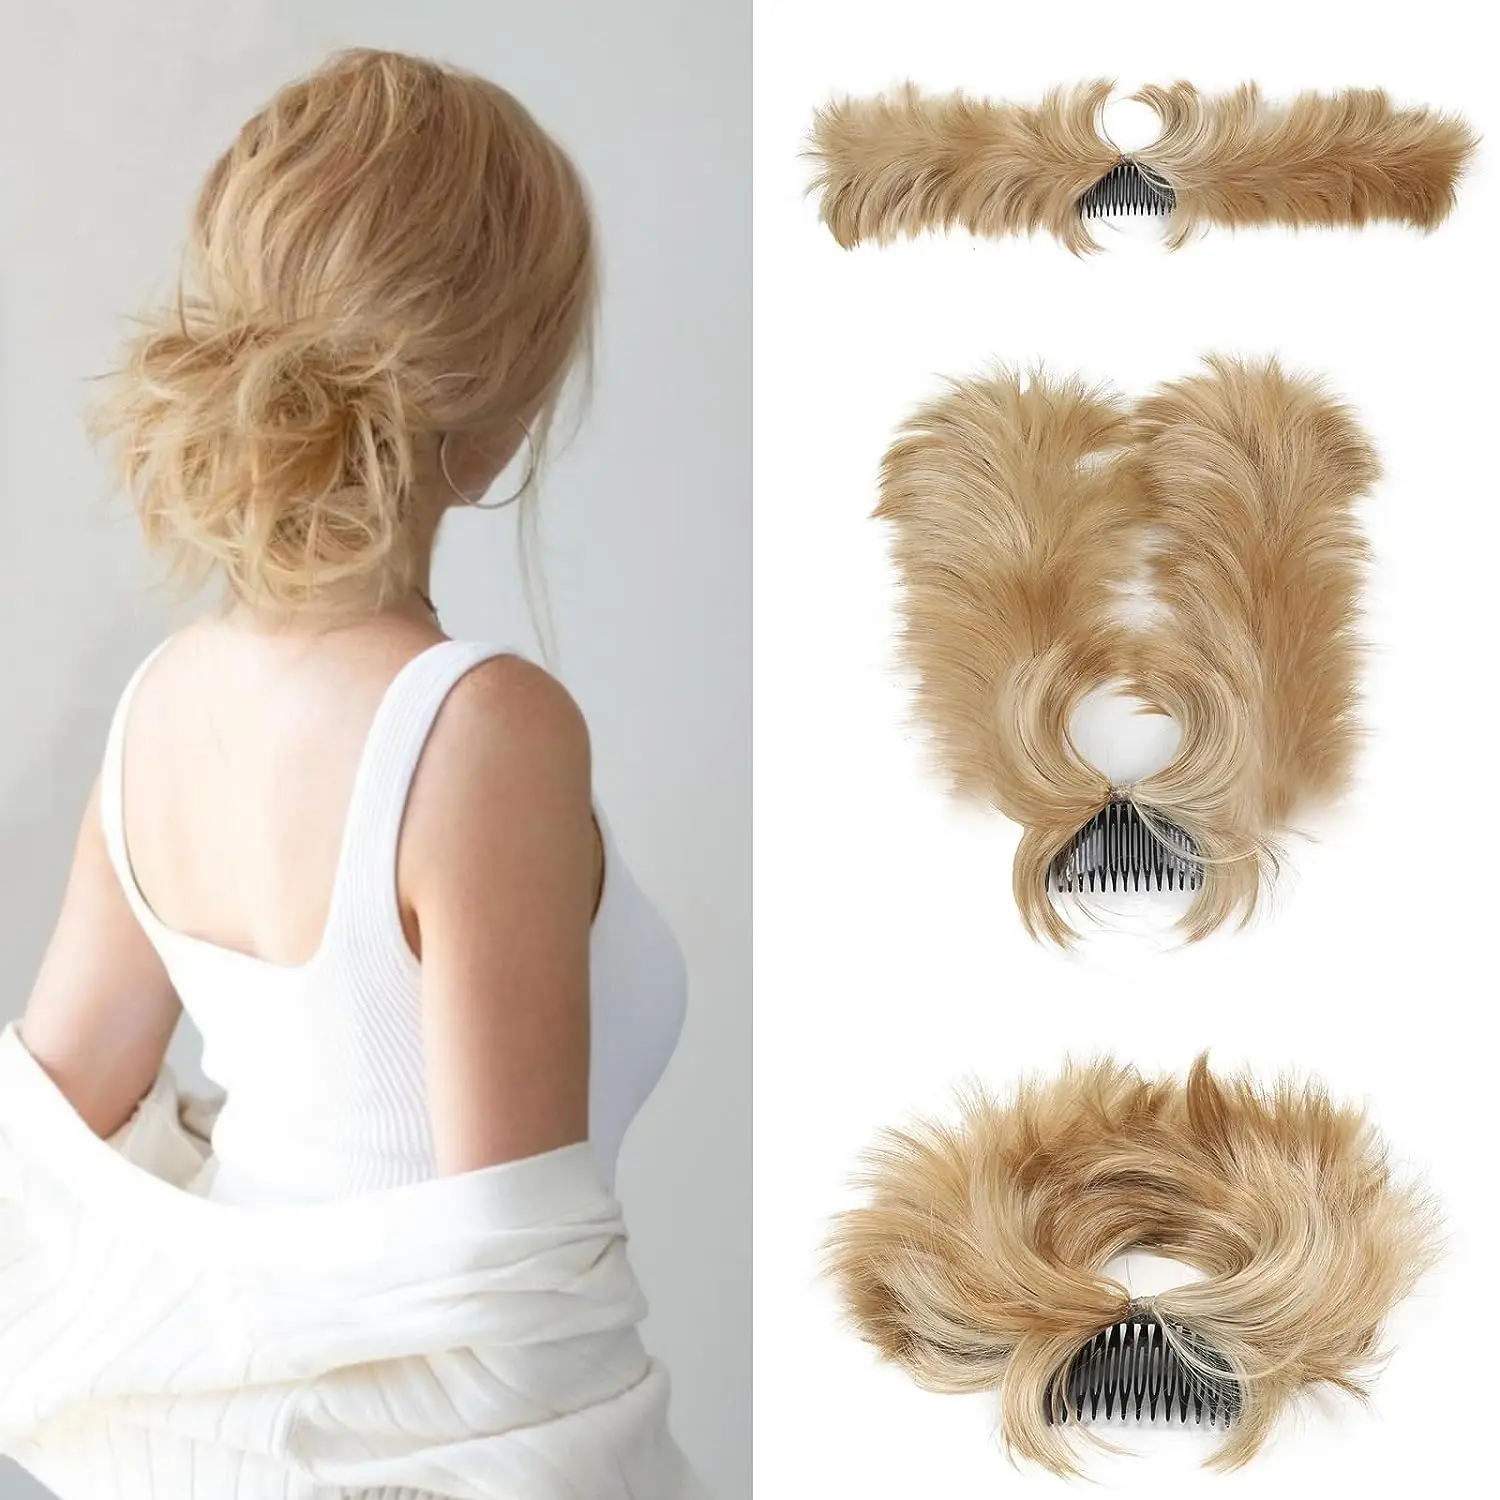 Messy Bun Hair Piece Side Comb Clip in Hair Bun Hairpiece for Women Short Natural Straight Versatile Adjustable Styles Easy Hair